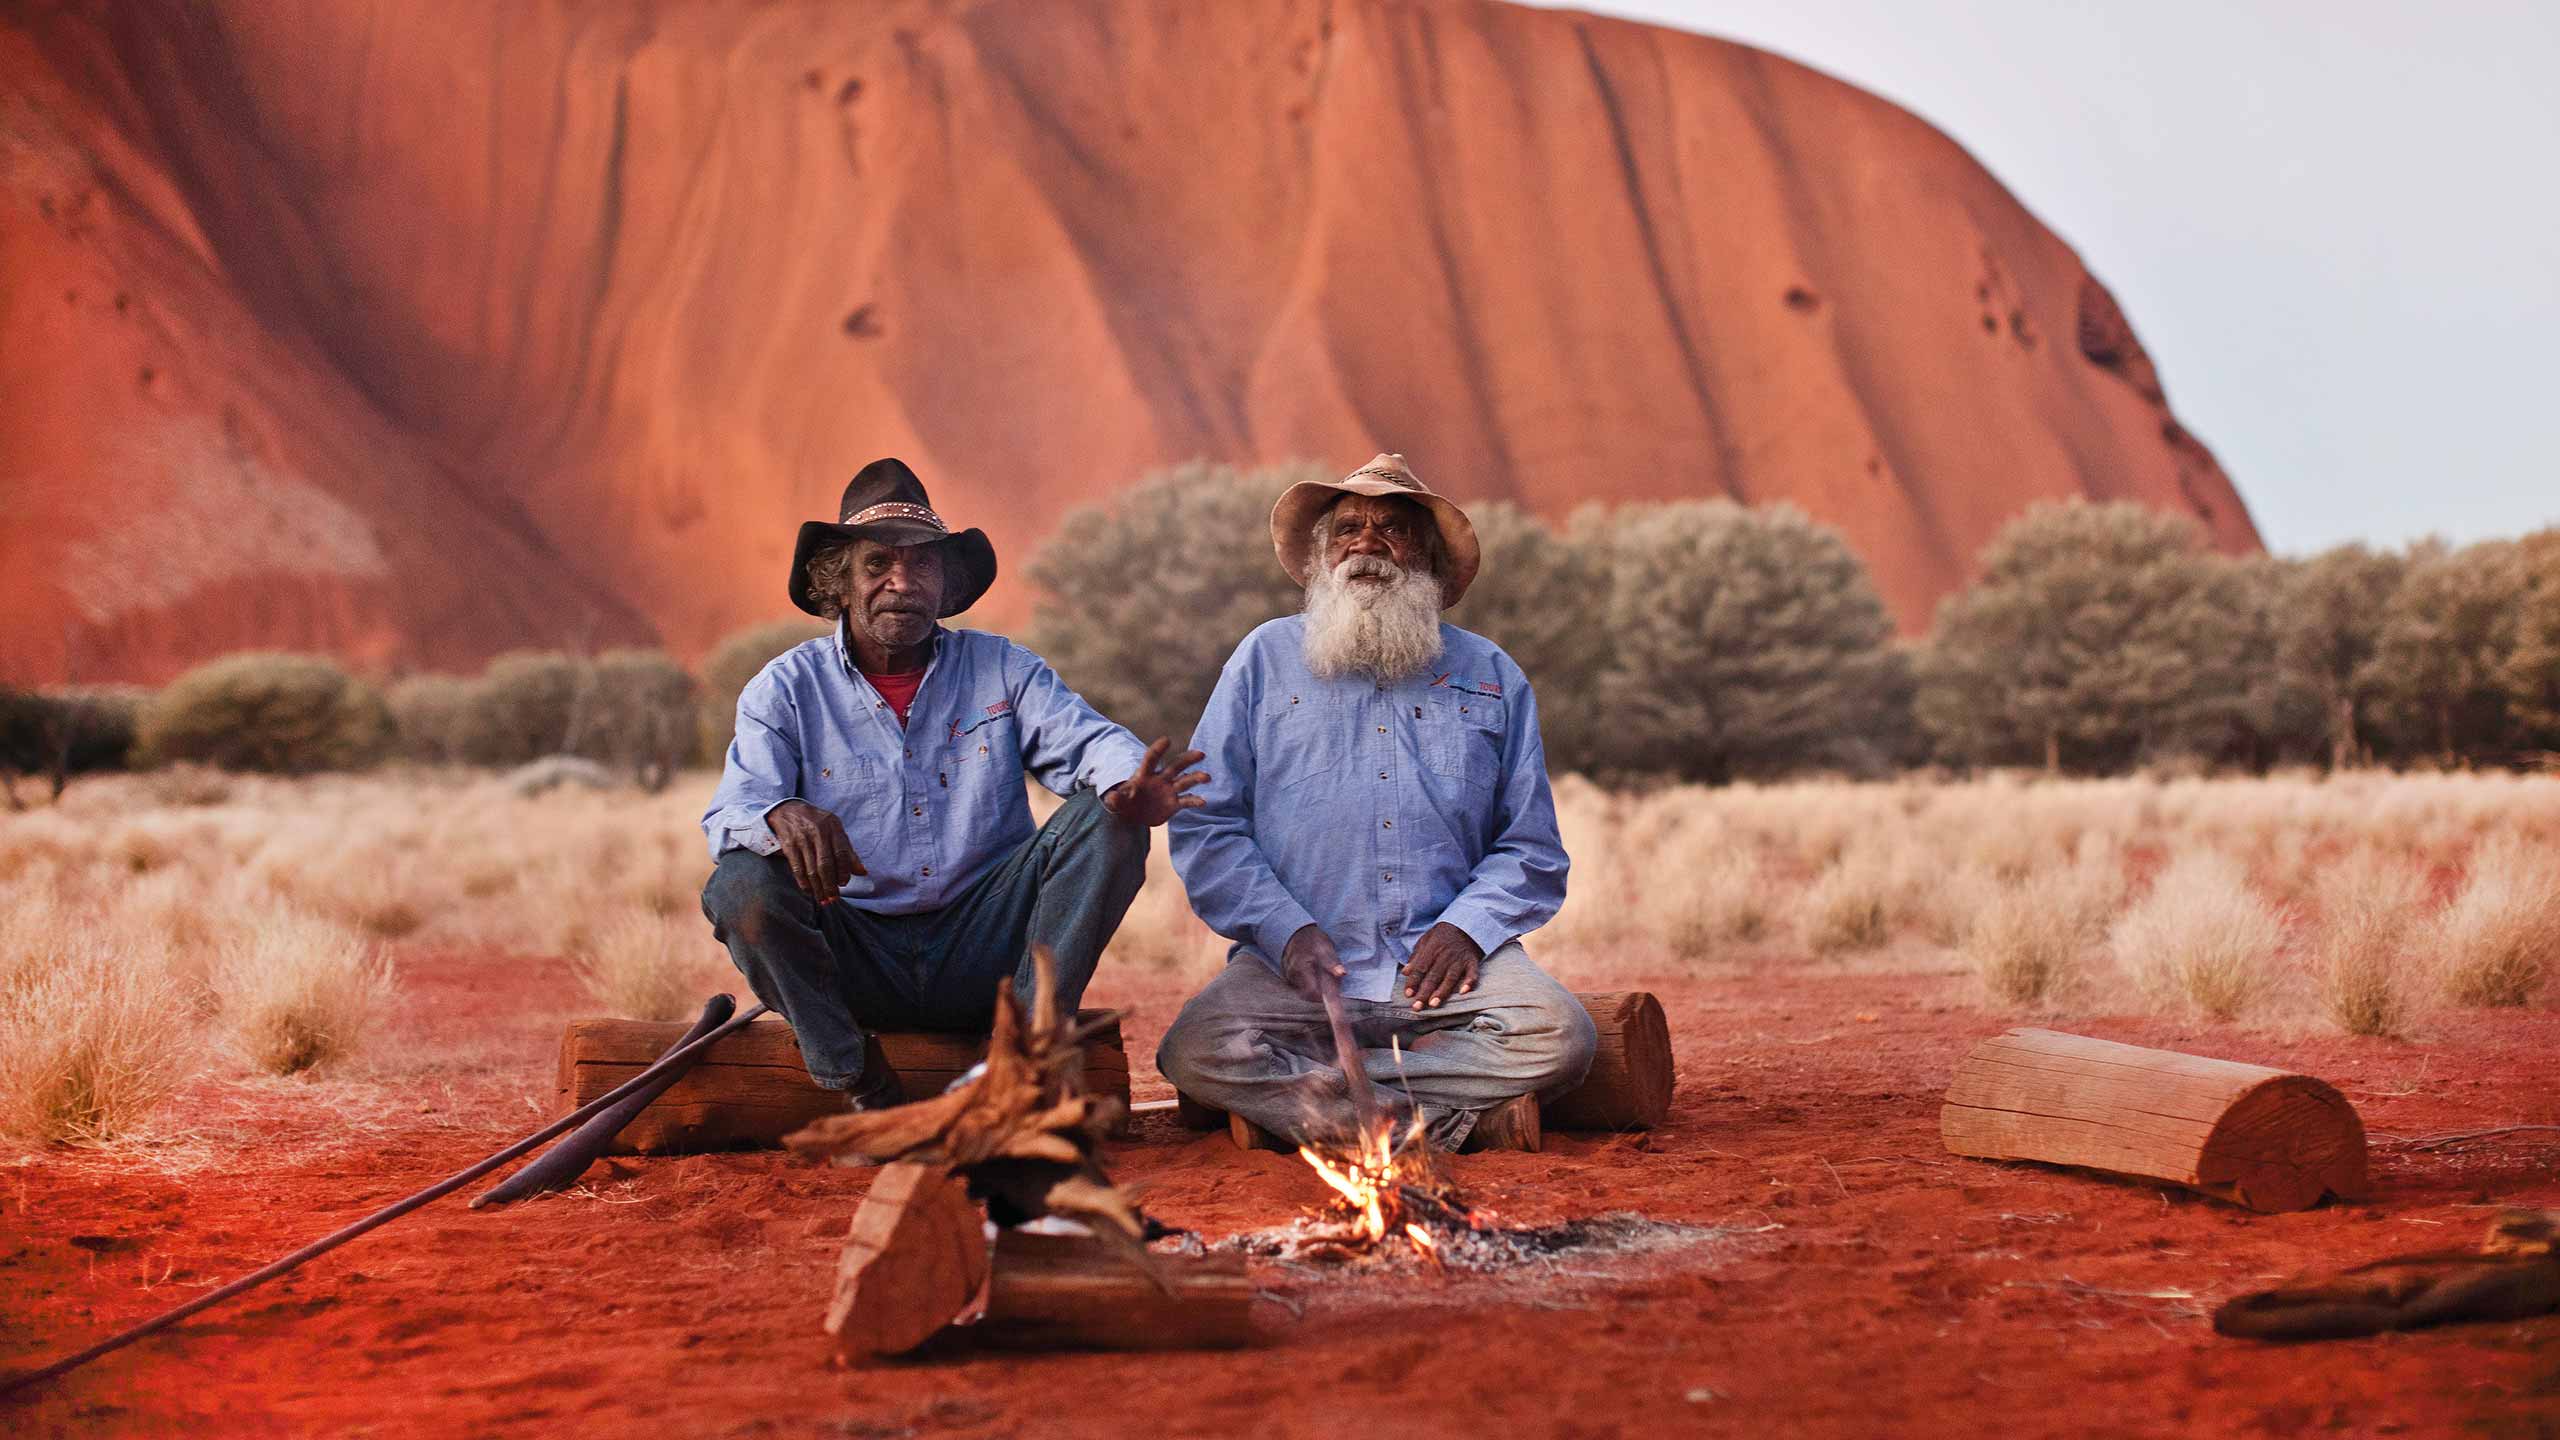 If you're planning a trip to Australia, a walkabout adventure with an indigenous Aboriginal guide just might be the unique encounter you've been seeking. 